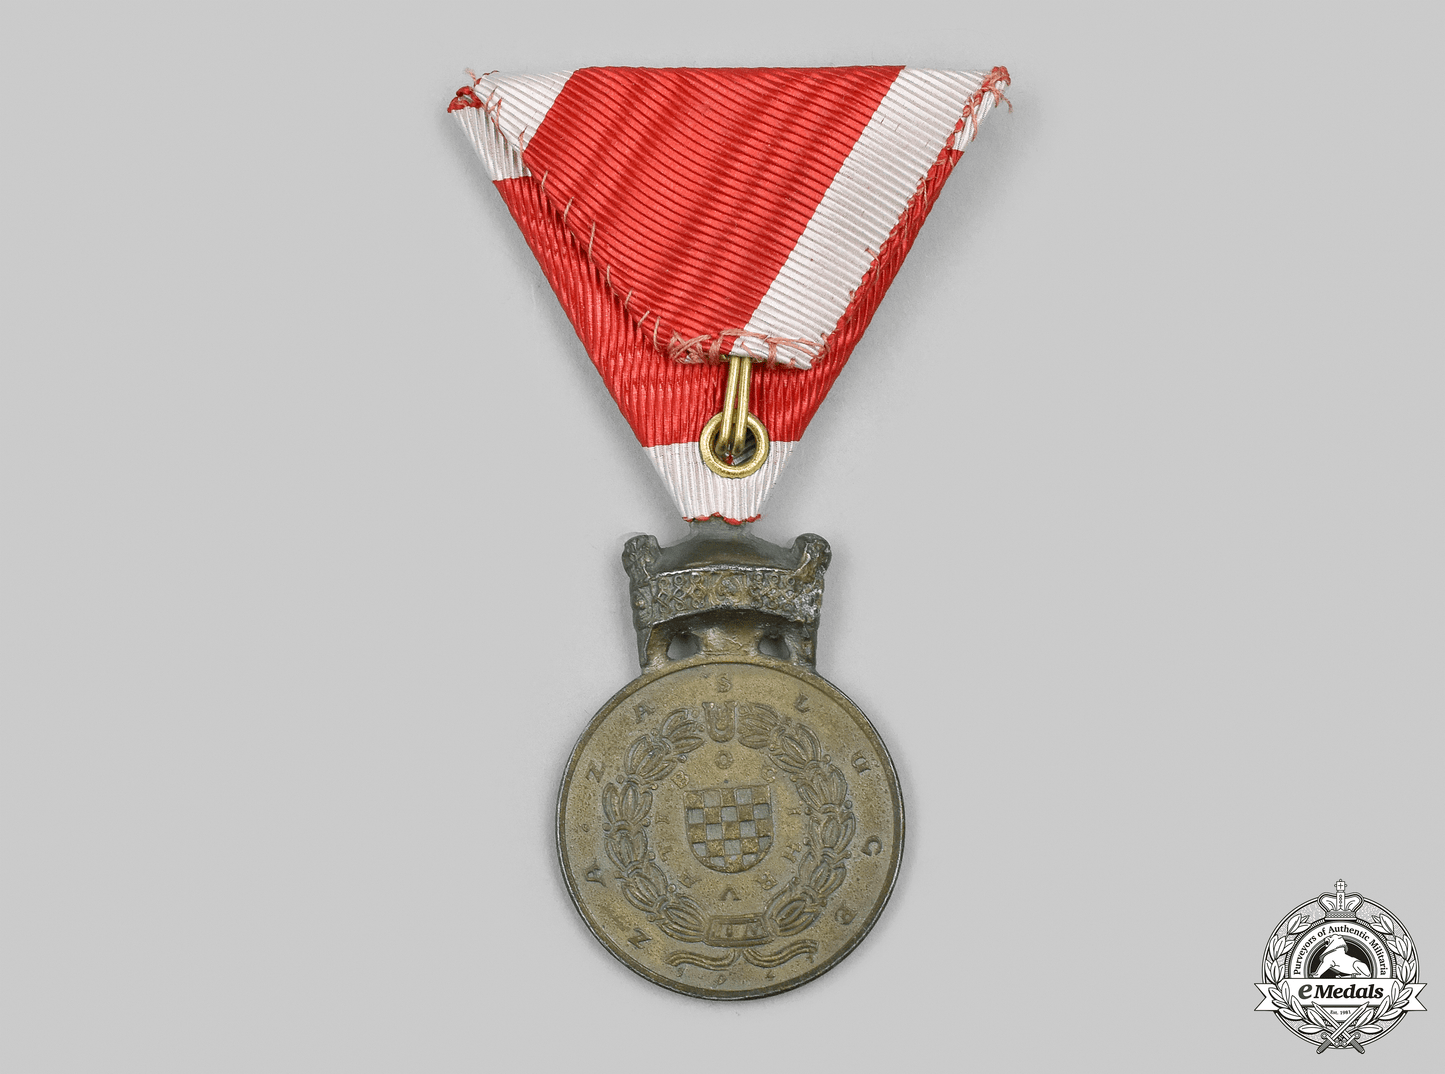 croatia,_independent_state._an_order_of_the_crown_of_king_zvonimir,_bronze_grade_medal,_c.1941_m21_mnc4492_1_1_1